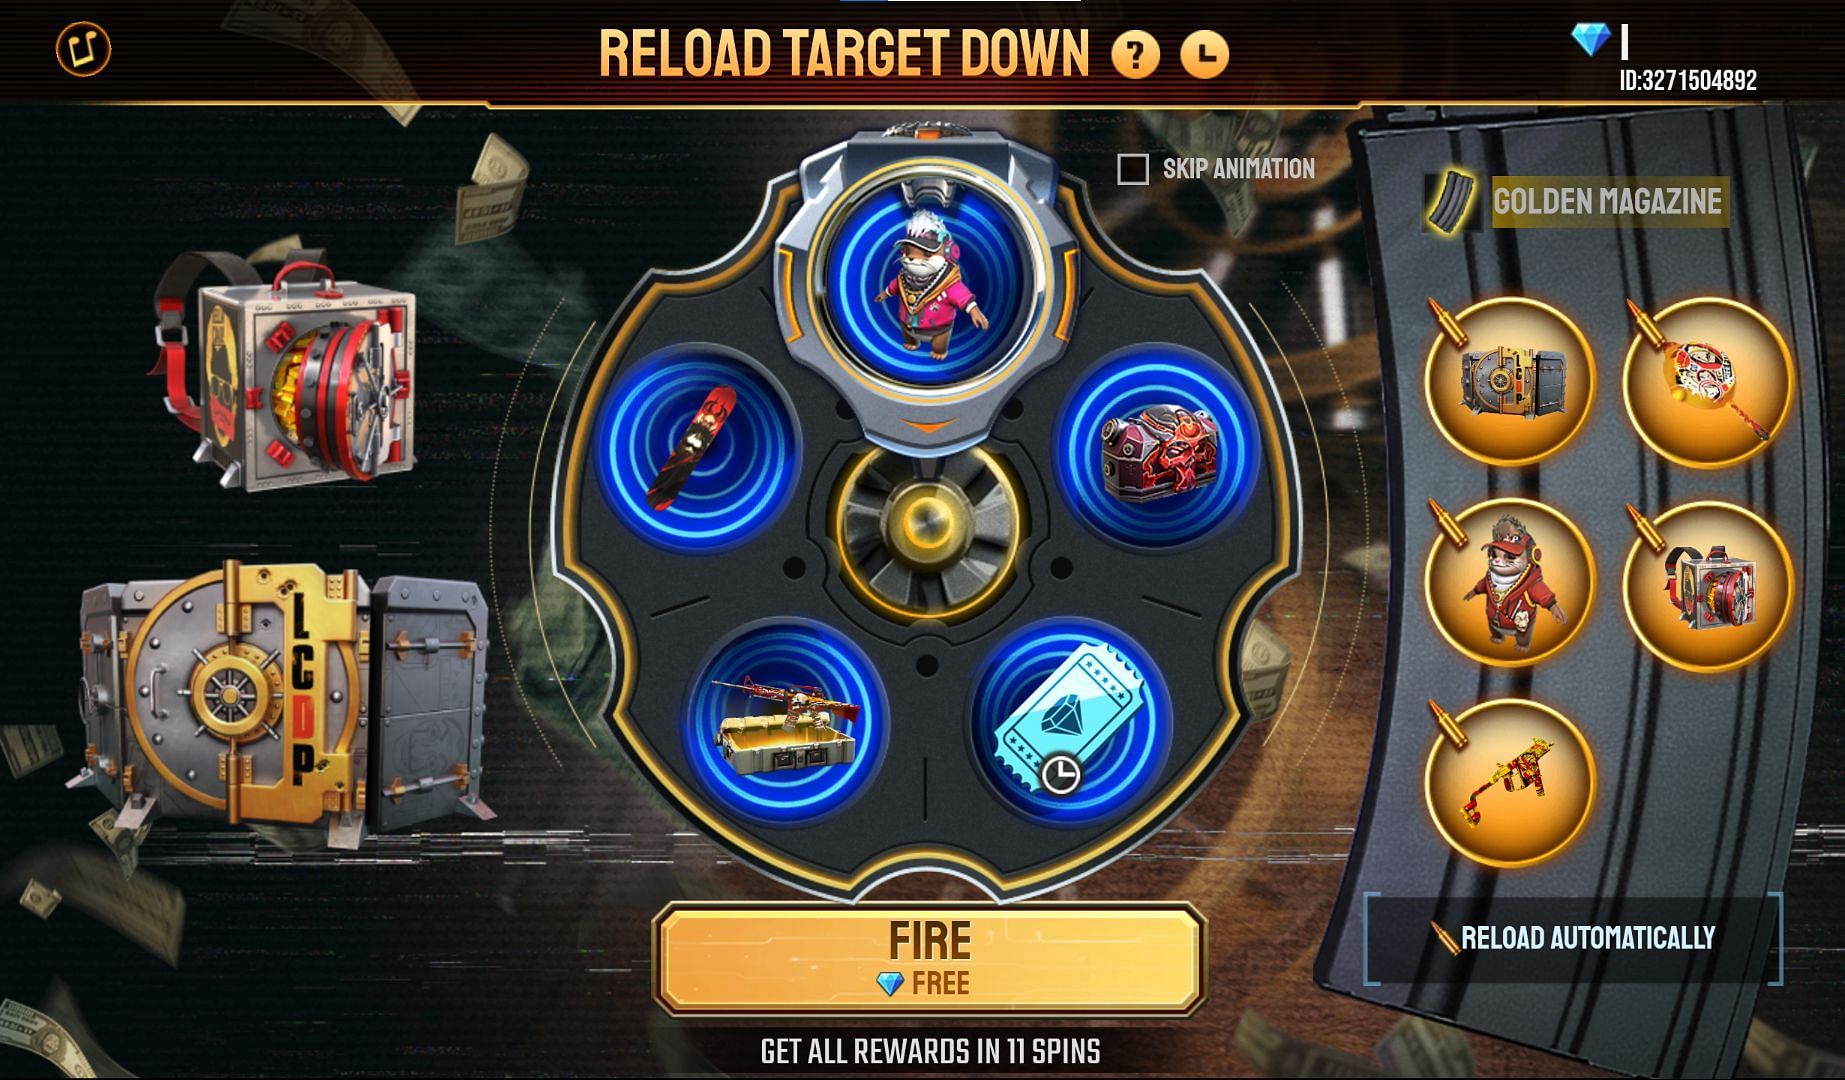 The first spin is available for free (Image via Free Fire)